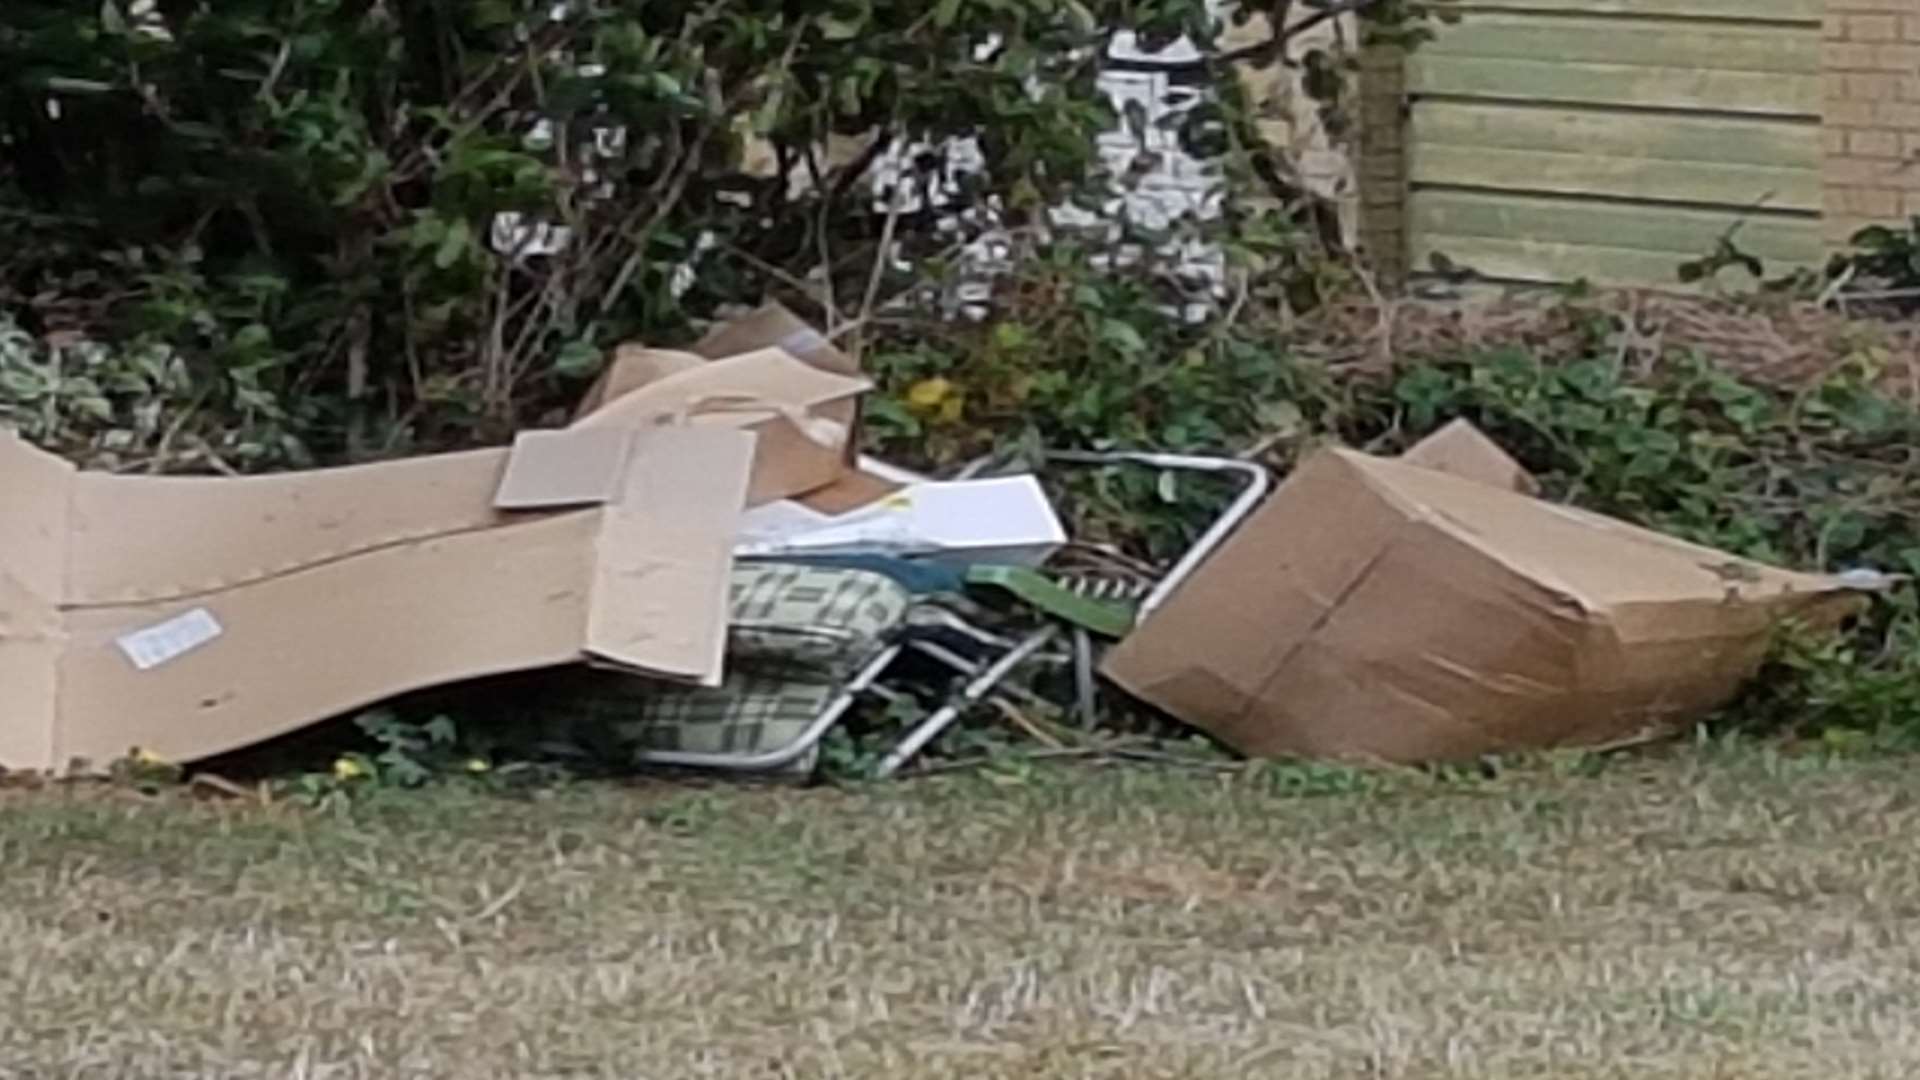 Piles of boxes left at the scene